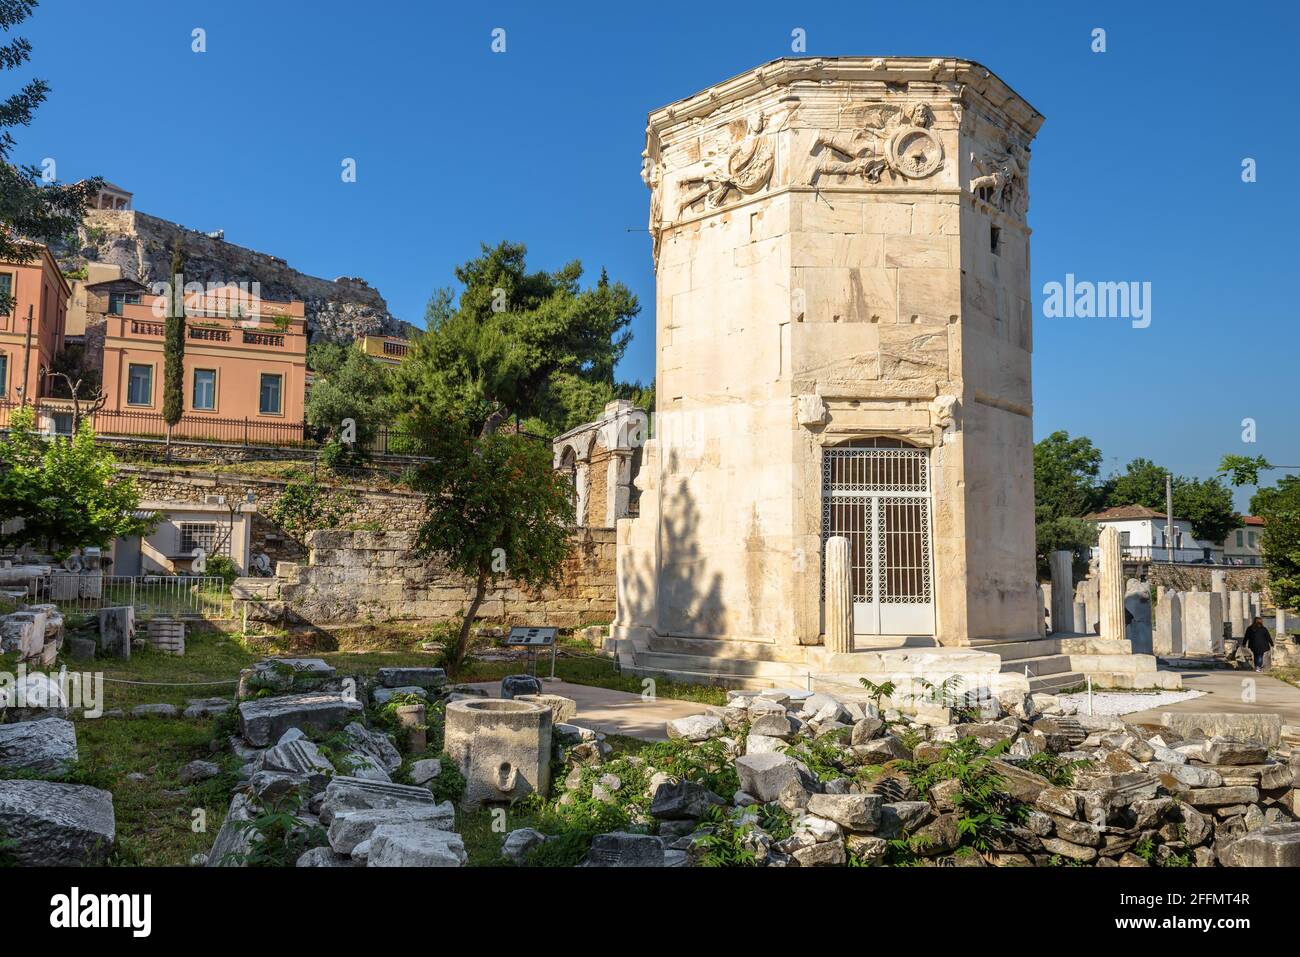 Tower of Winds or Aerides in Roman Agora, Athens, Greece. It is landmark of Athens. Ancient Greek ruins in Athens city center at Plaka district. Conce Stock Photo